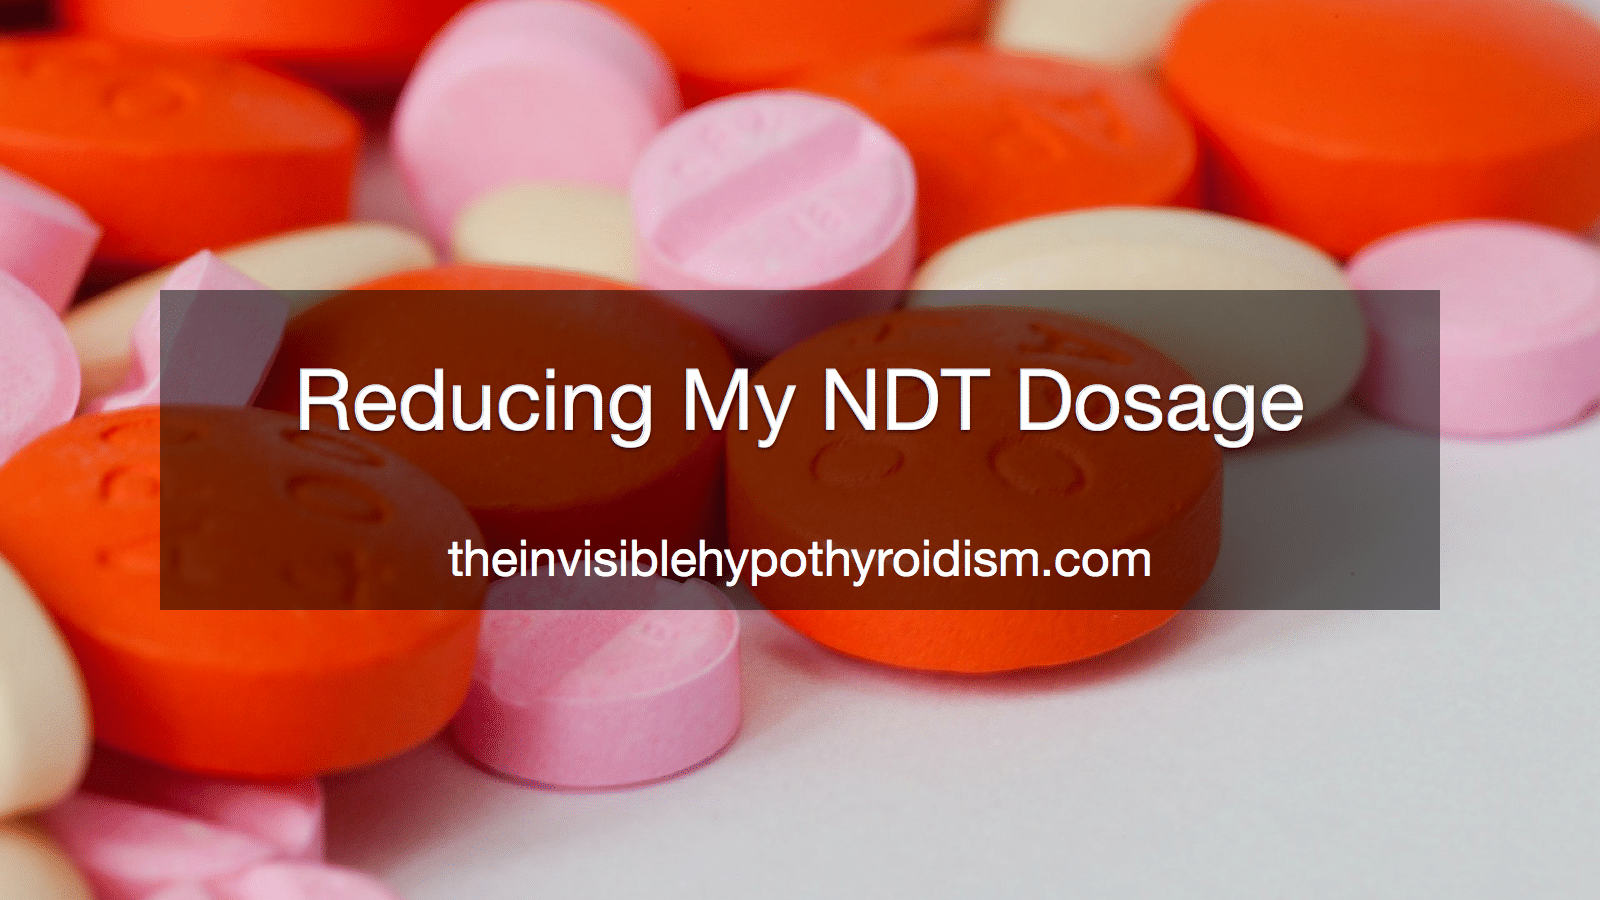 Reducing My NDT Dosage